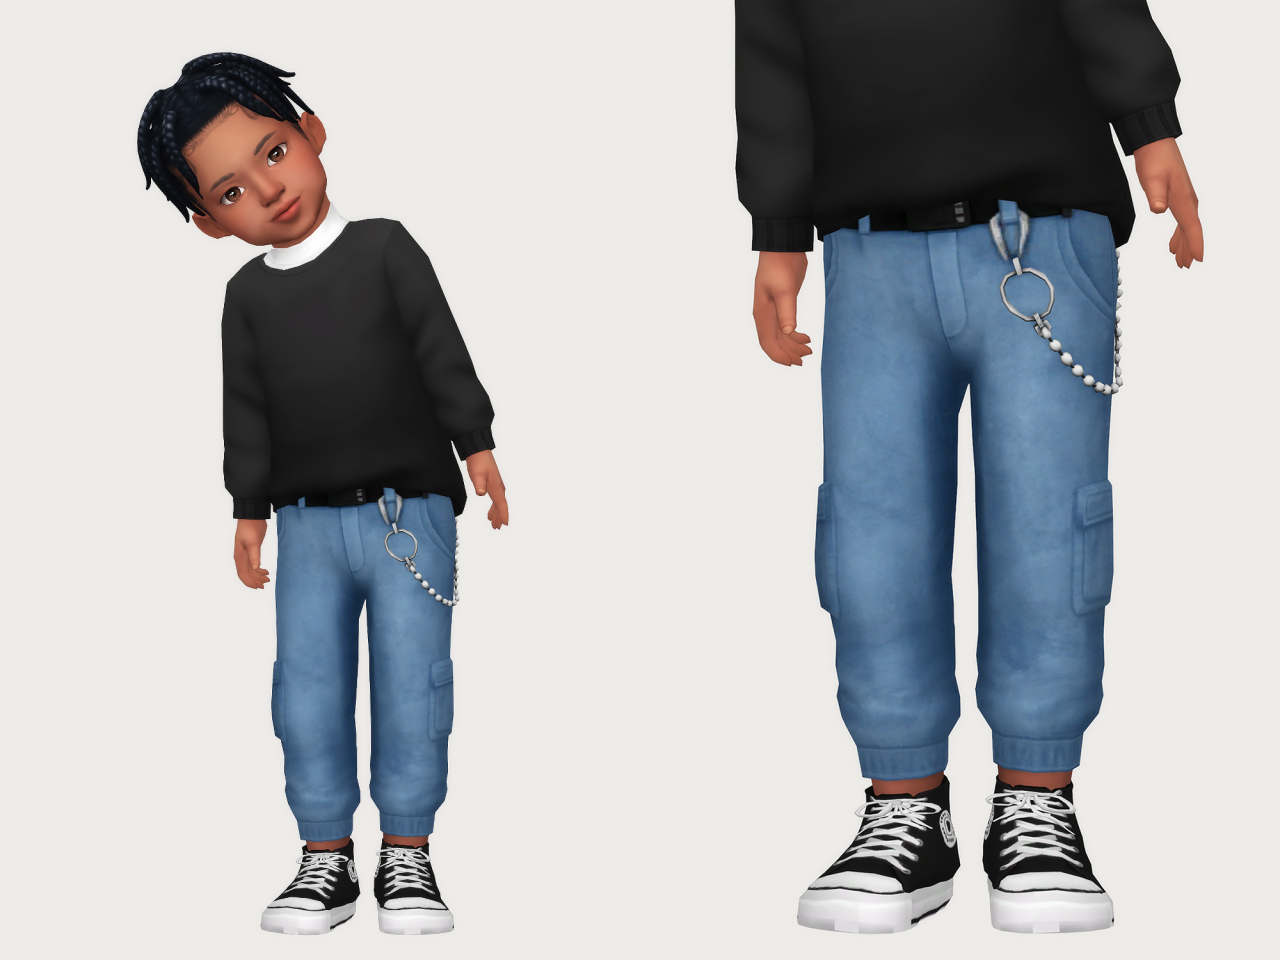 Download jeon cargos - toddler - The Sims 4 Mods - CurseForge